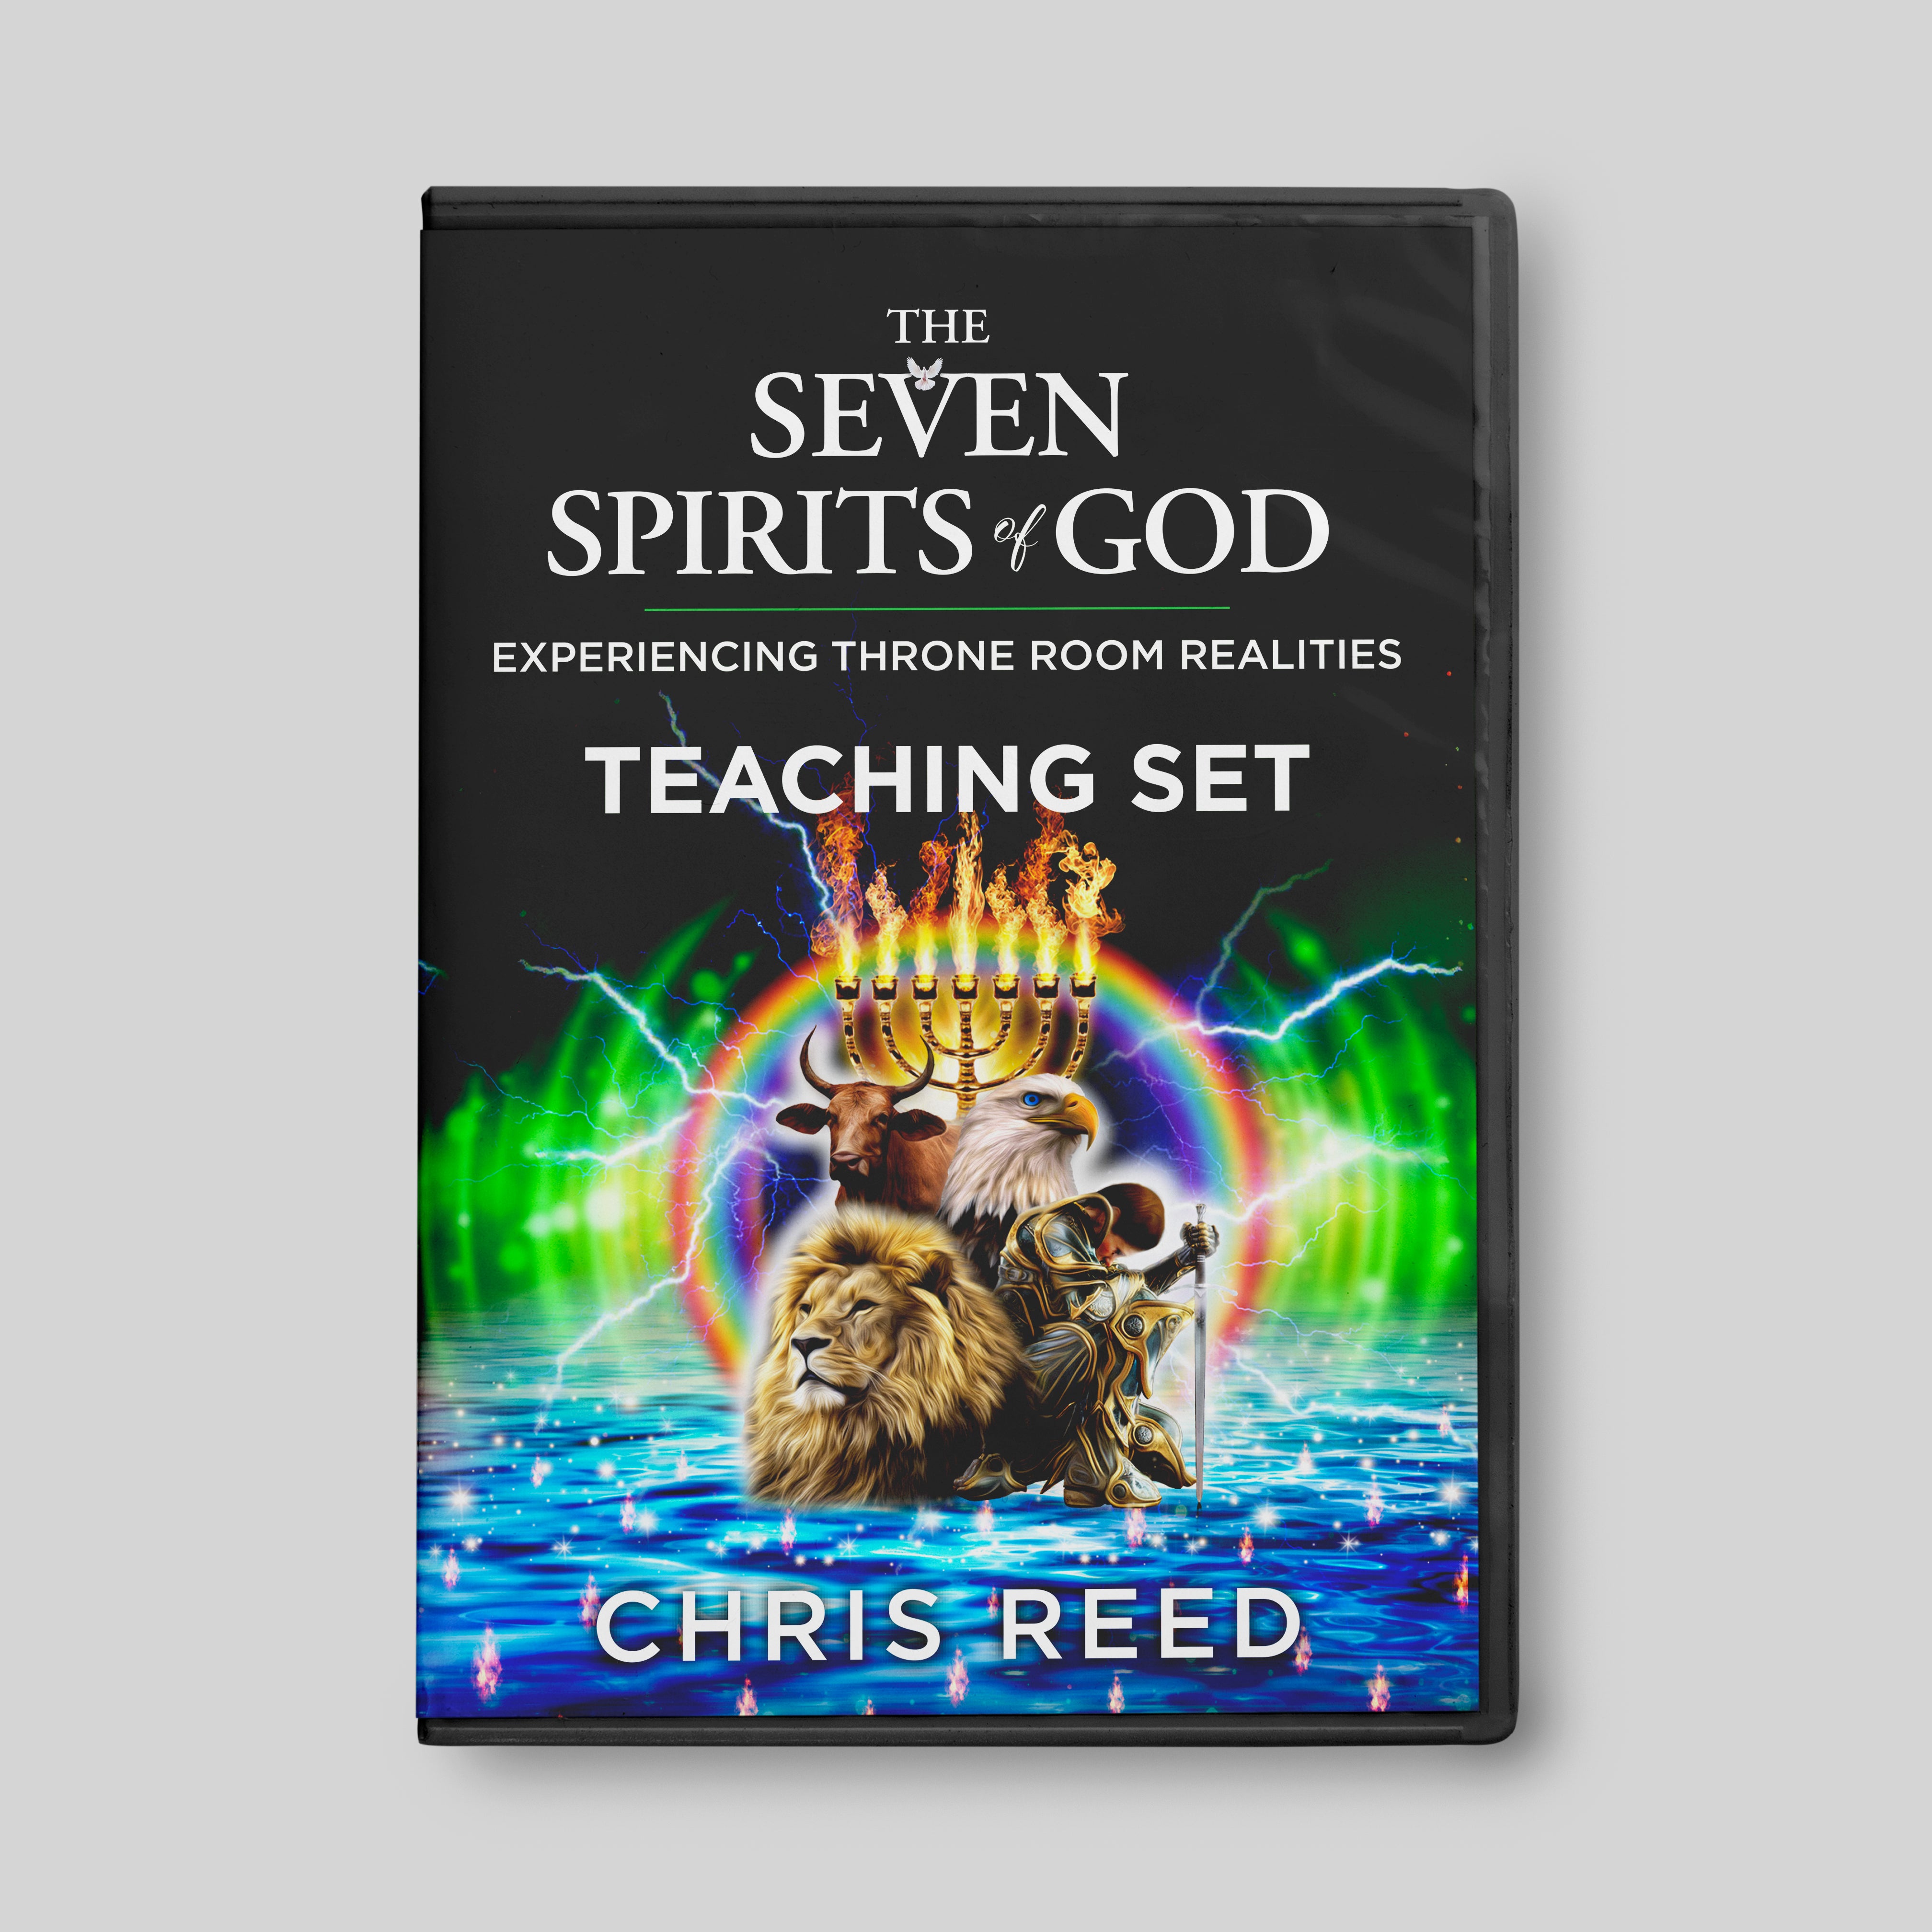 The Seven Spirits Of God (7 Messages) DVD Teaching Set by Chris Reed